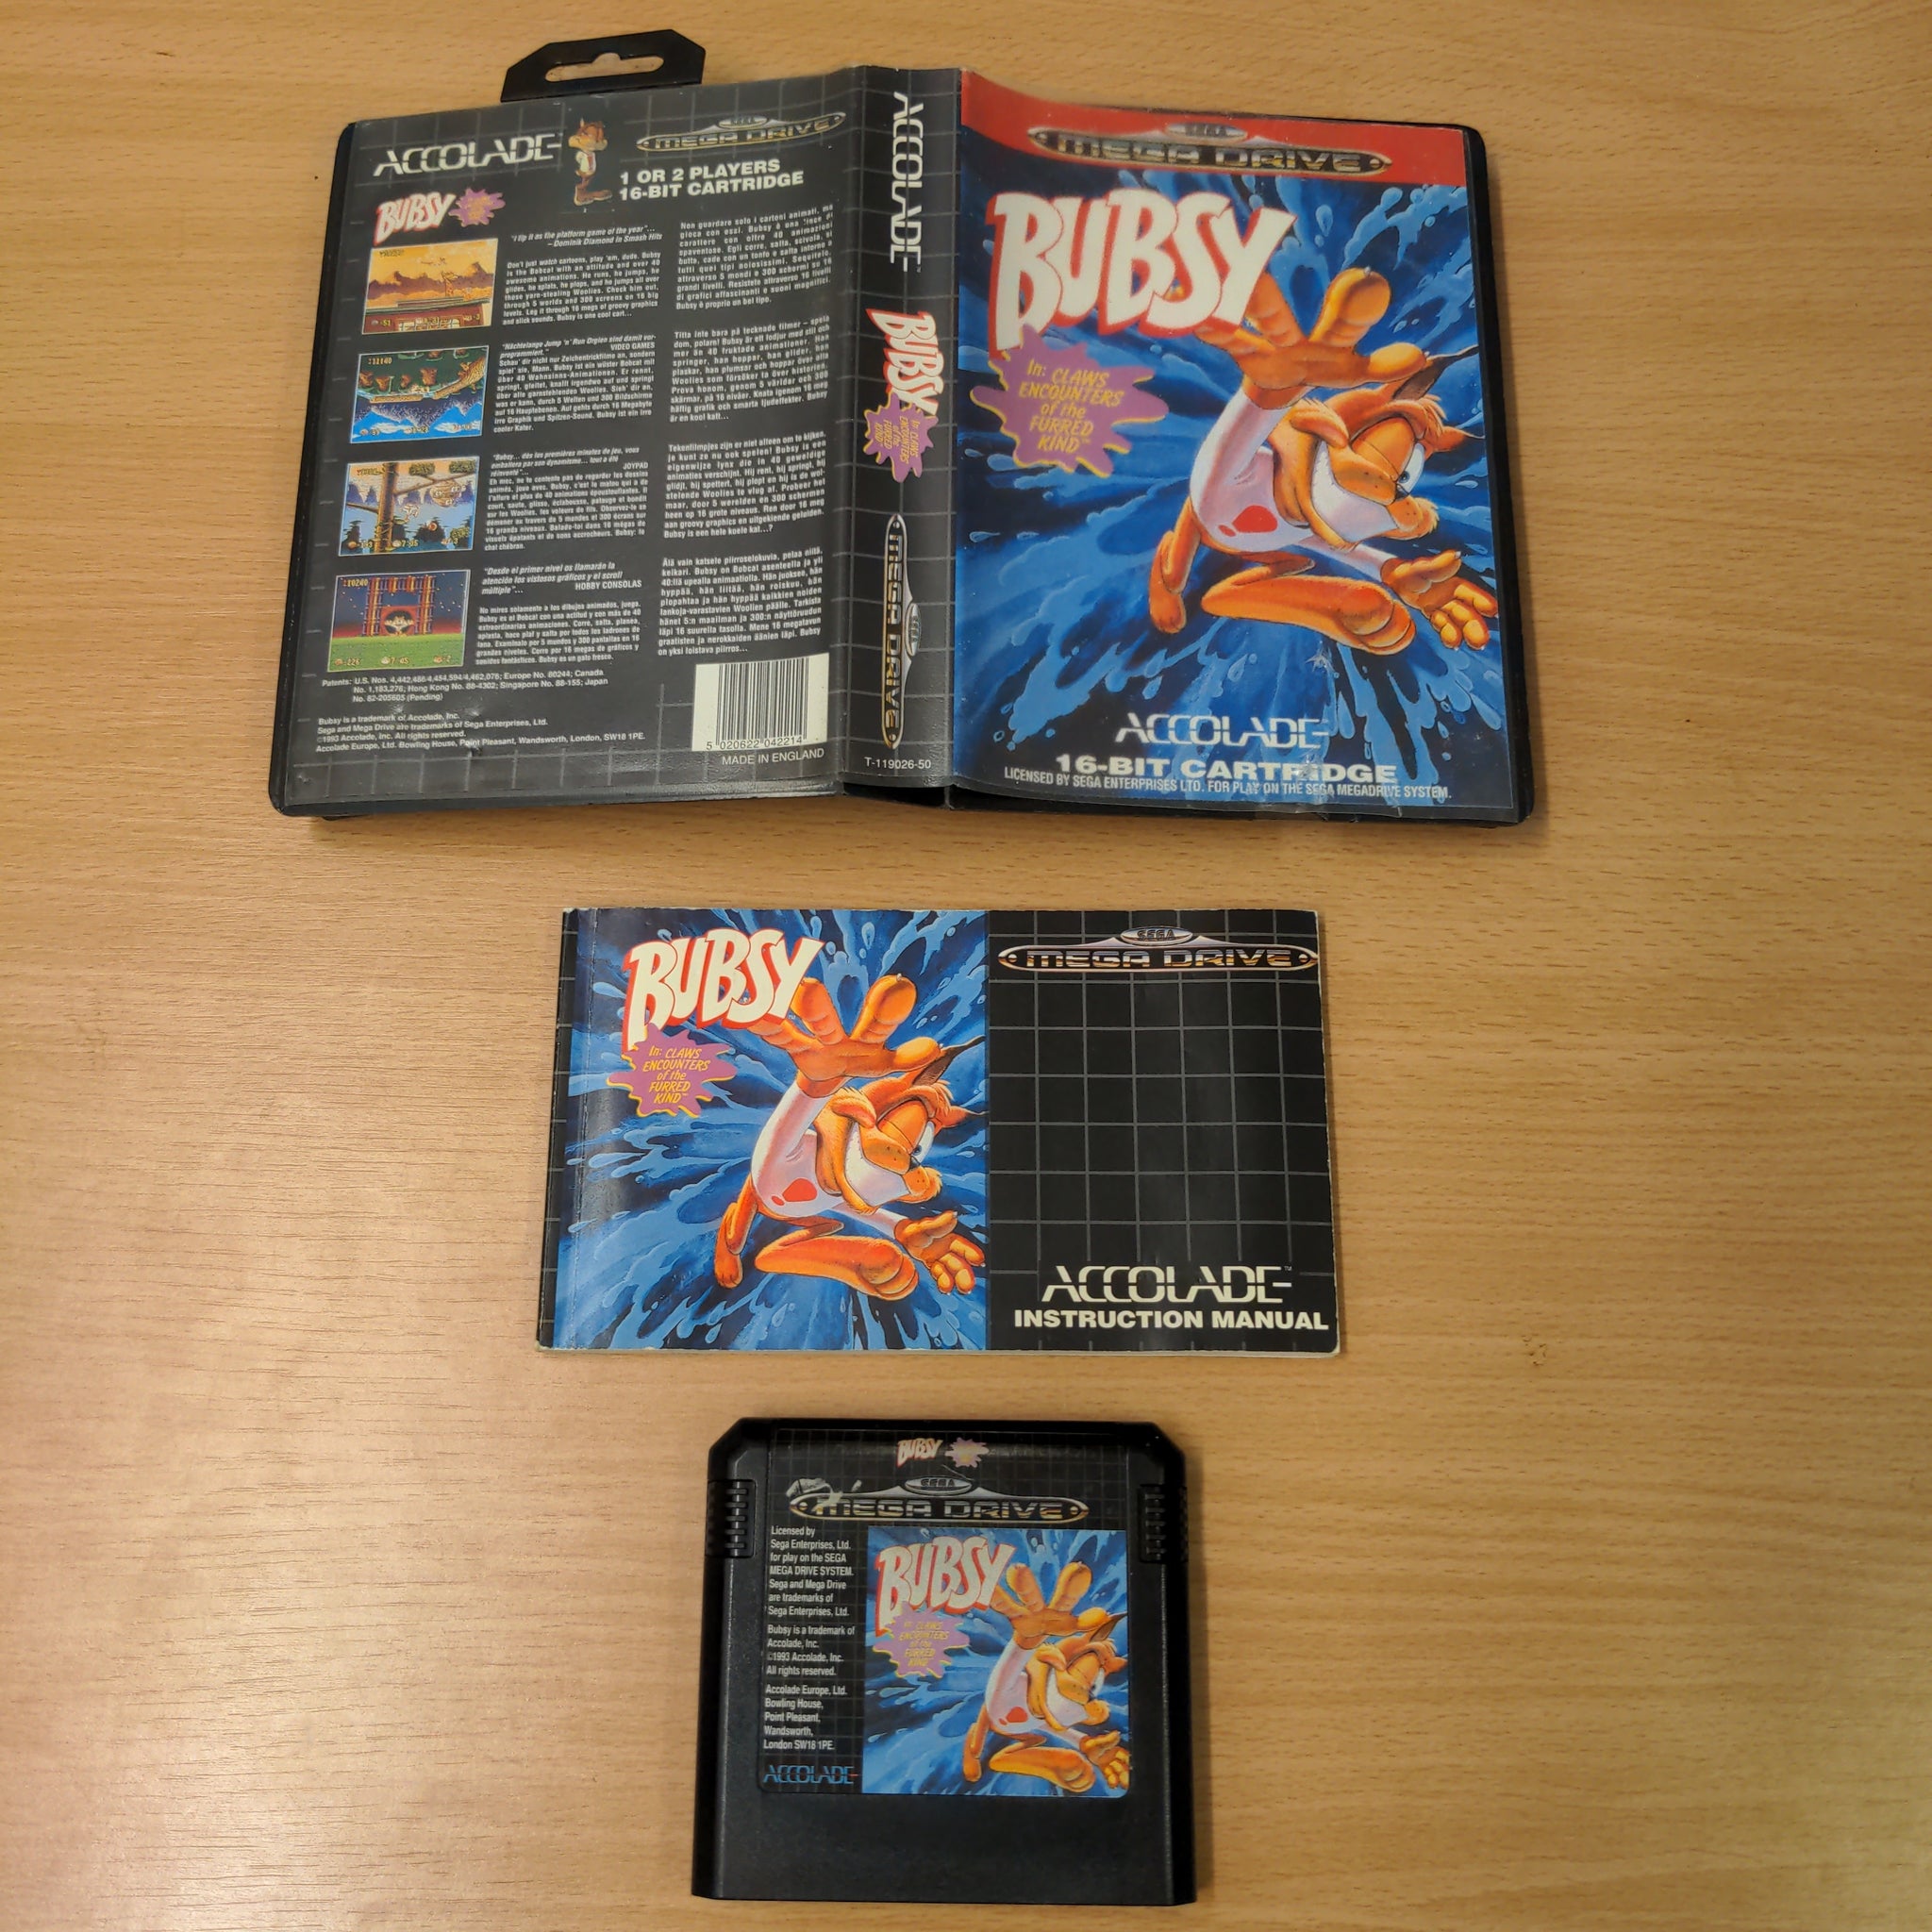 Bubsy in Claws Encounters of the Furred Kind Sega Mega Drive game complete